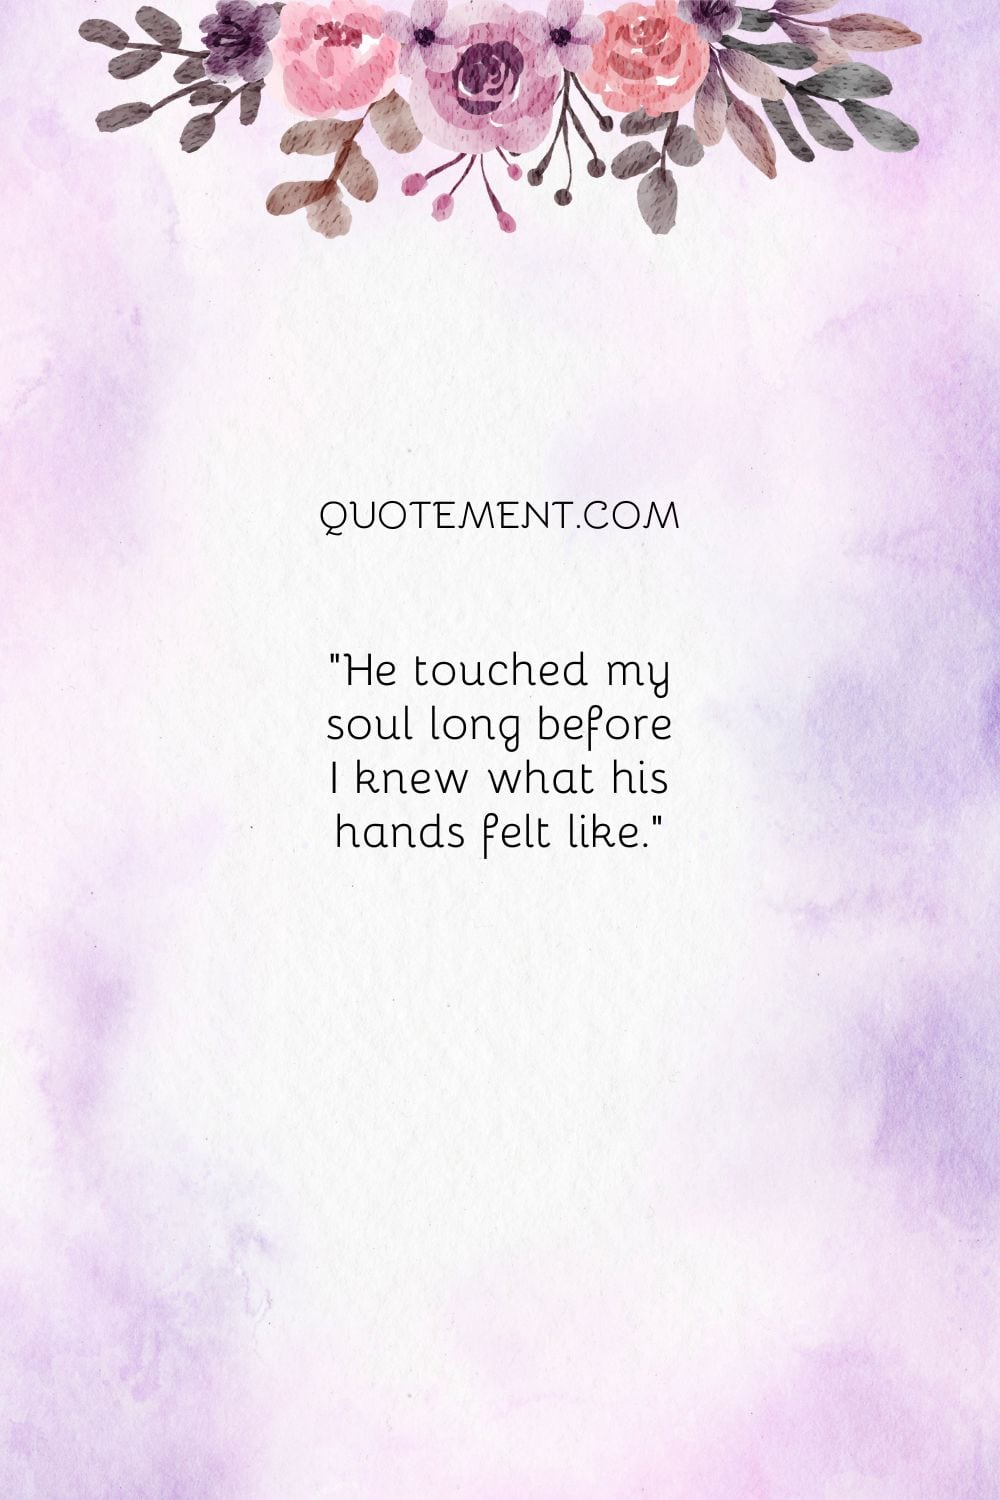 He touched my soul long before I knew what his hands felt like.